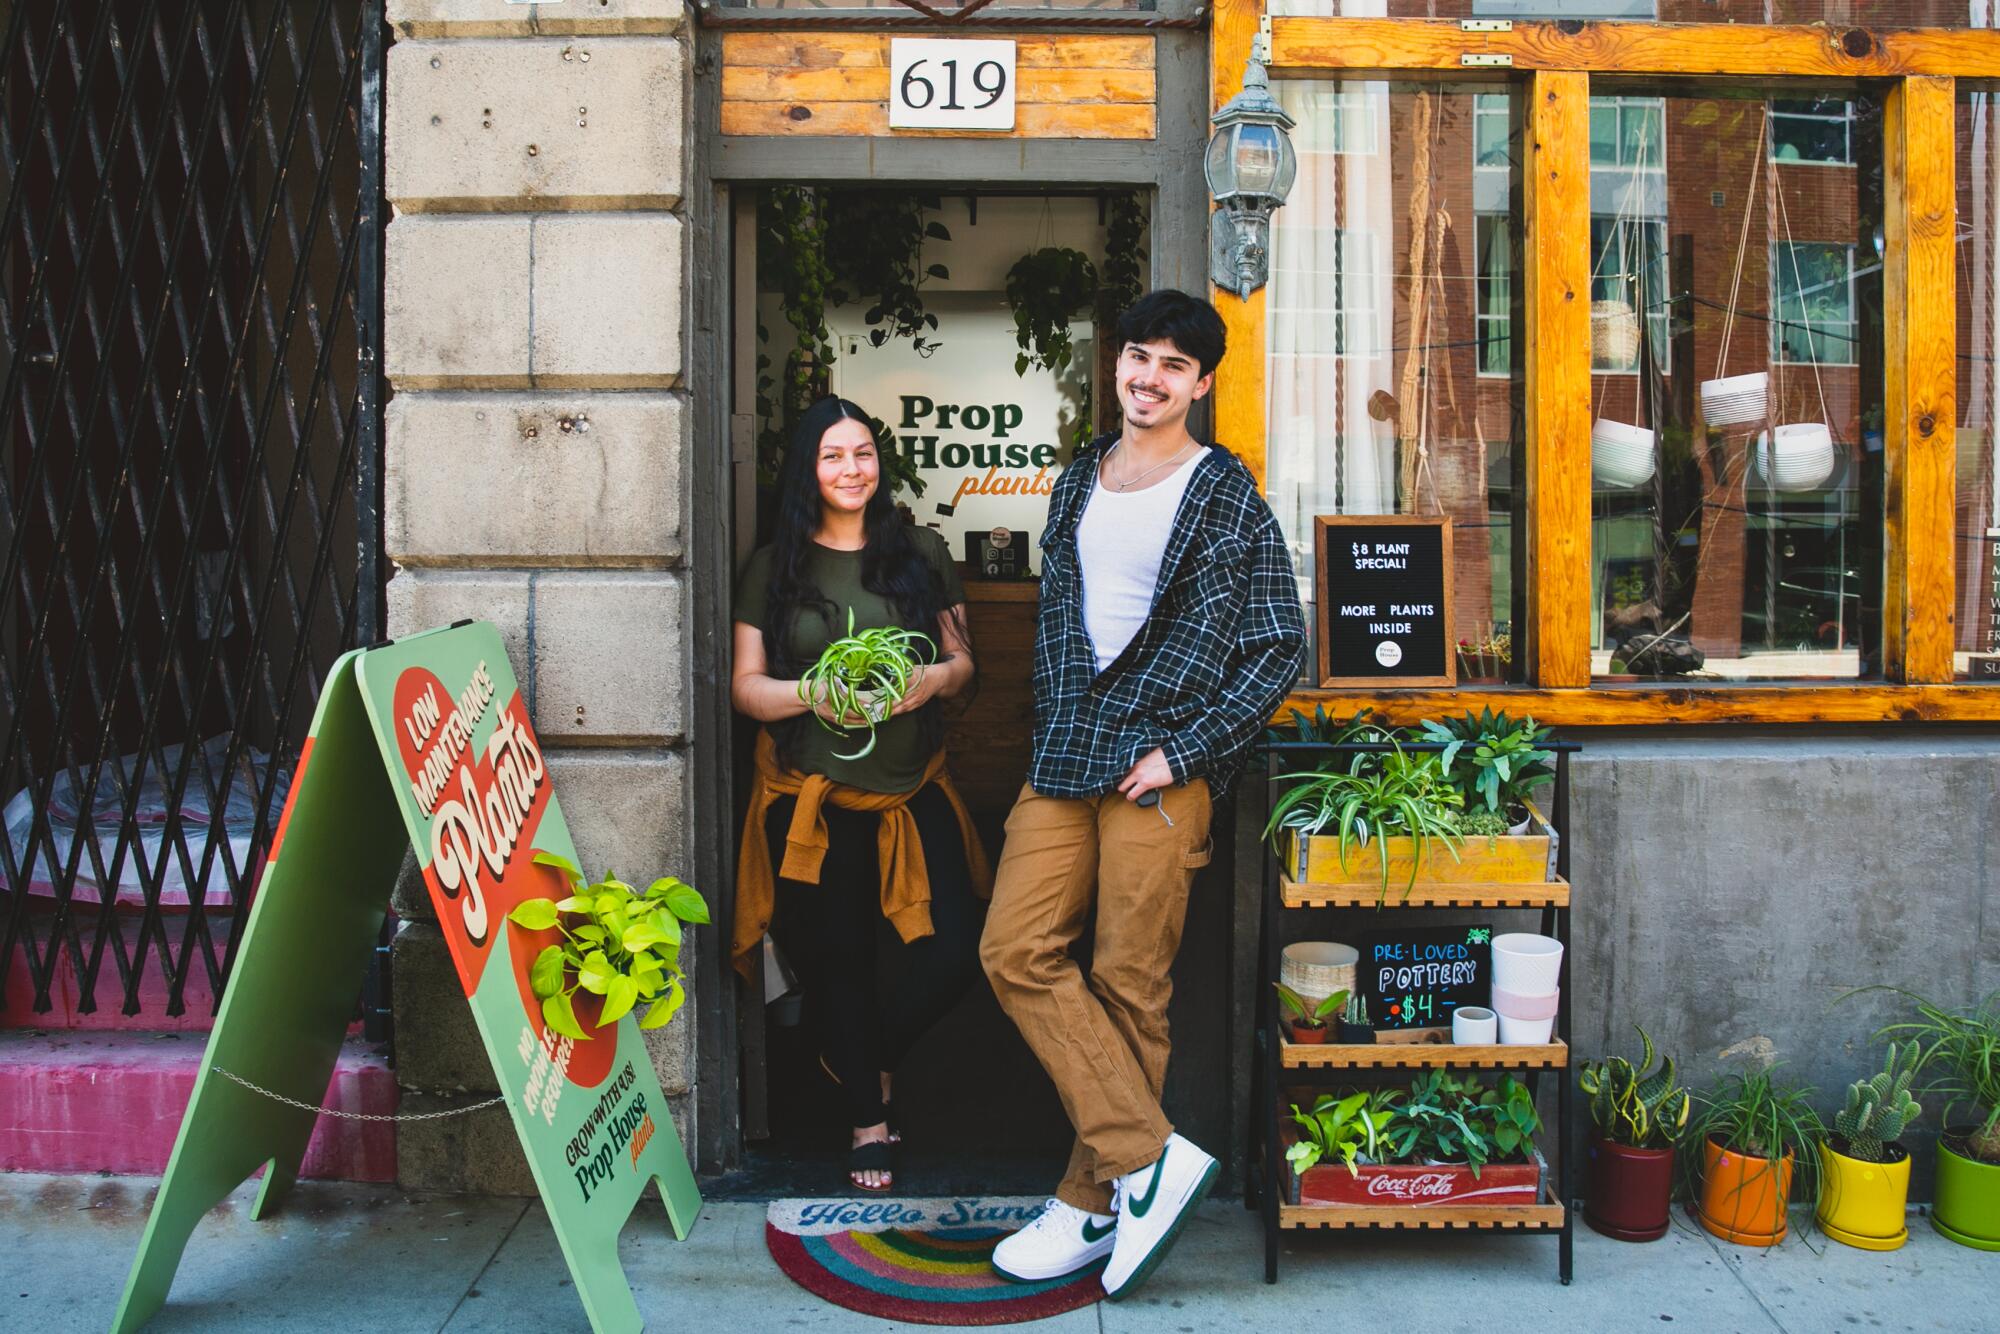 A young woman and a young man smiling outside the reading door "Prop house plants."